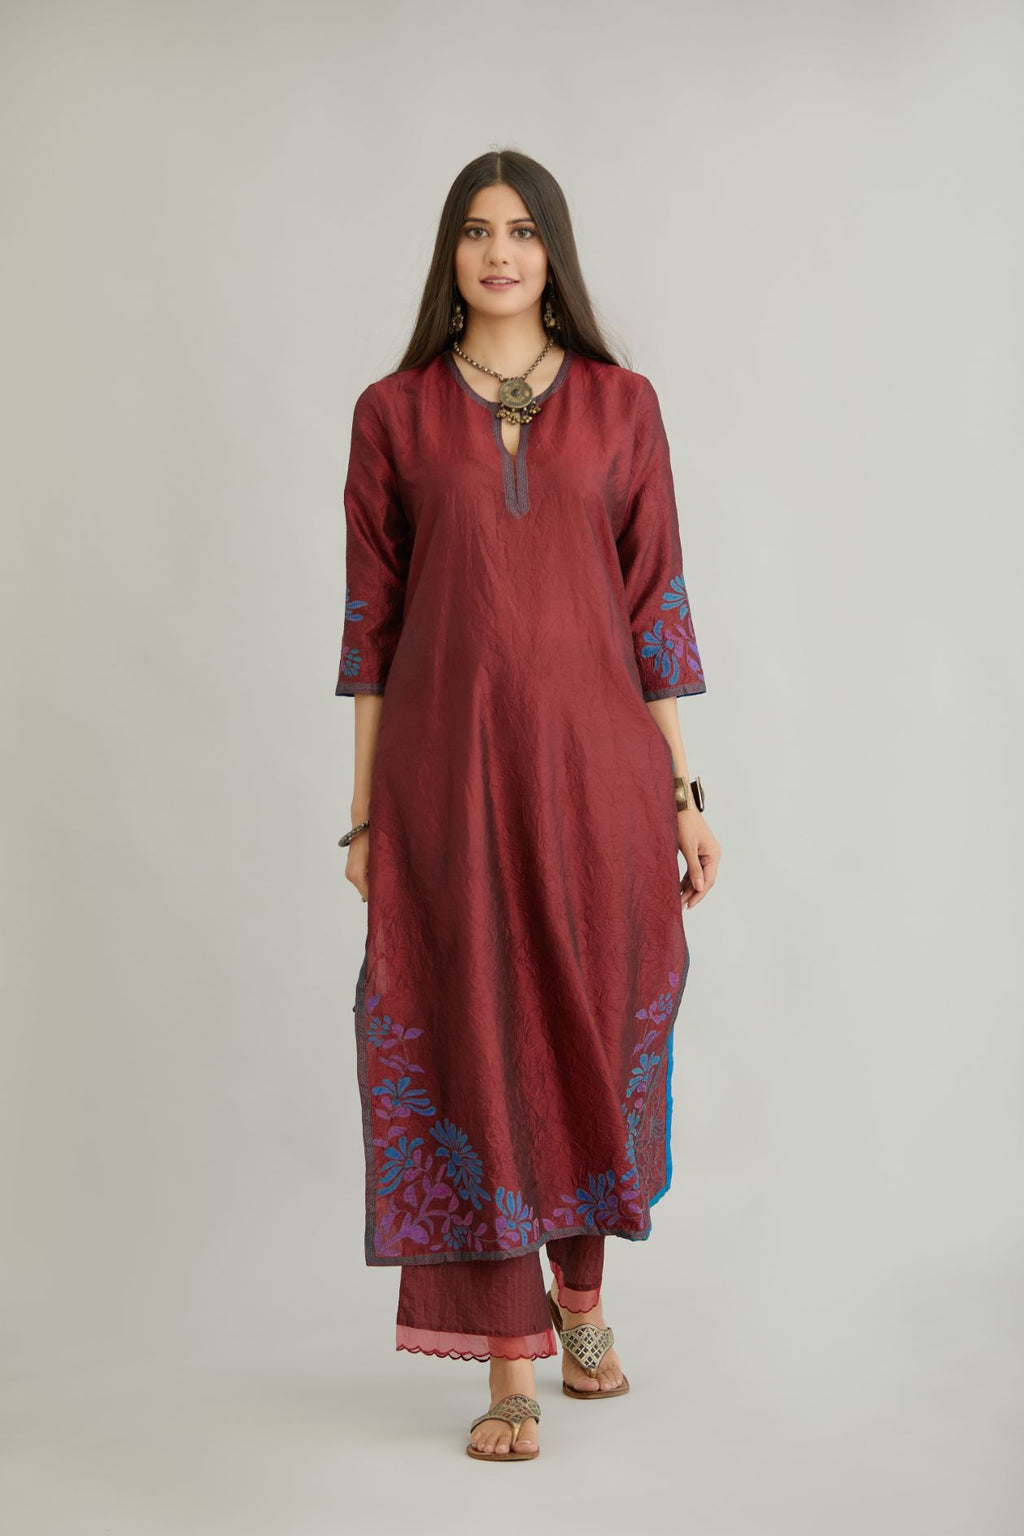 Maroon hand crushed silk kurta set with contrast silk fabric applique work at hem, side slits and sleeves with an embroidered neckline.